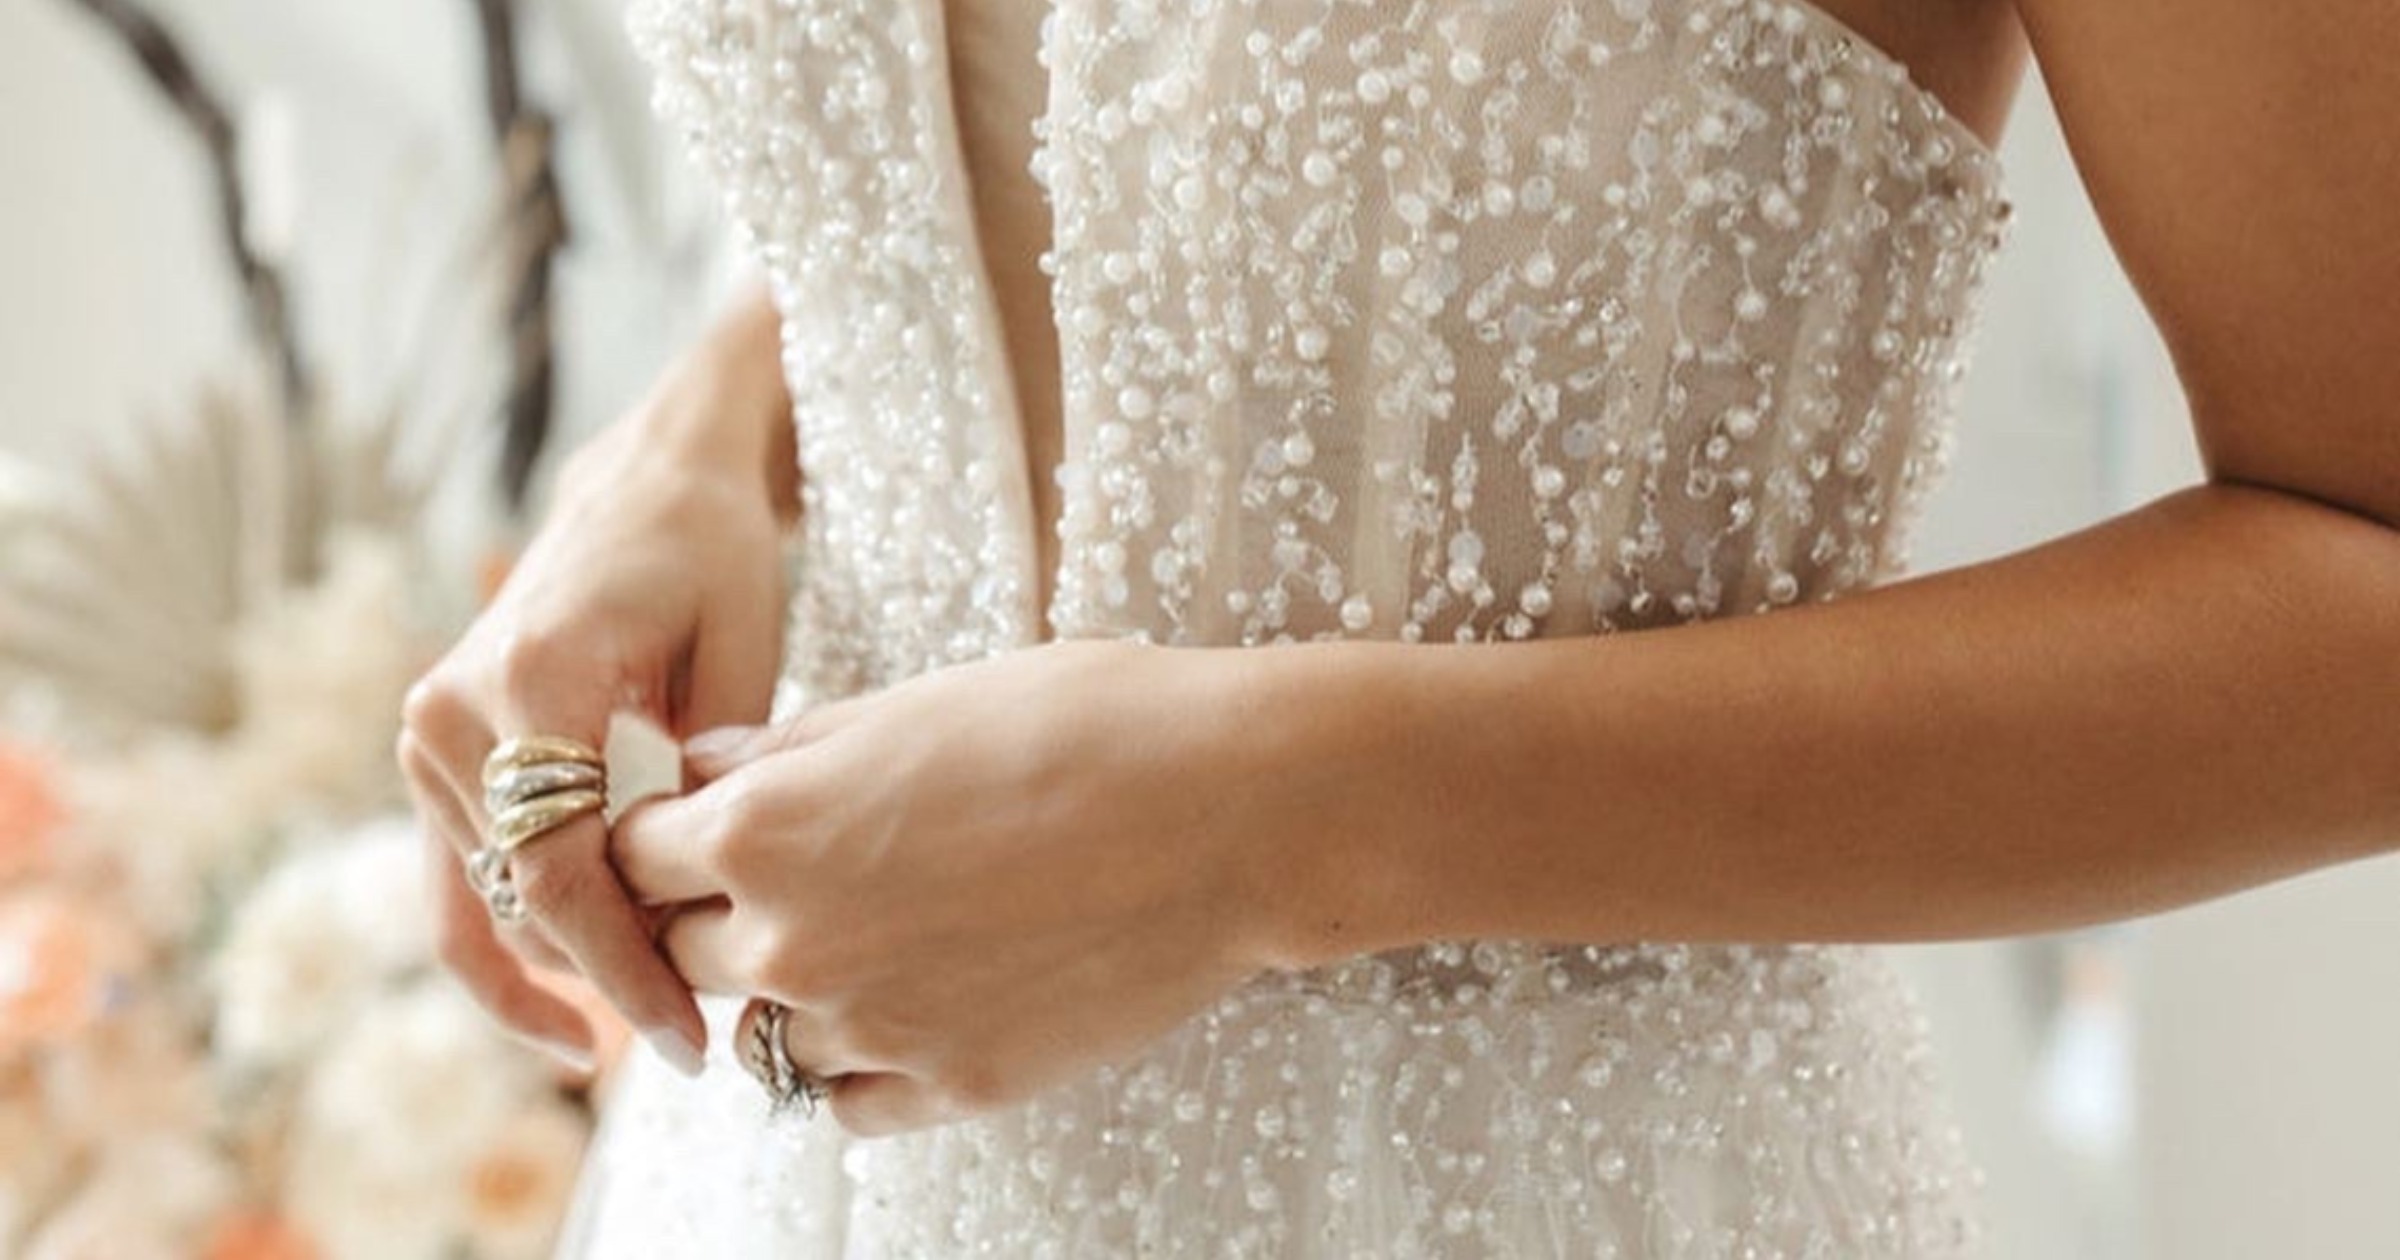 How to Snag a Dream Wedding Gown for 80% Less Than Its Retail Price